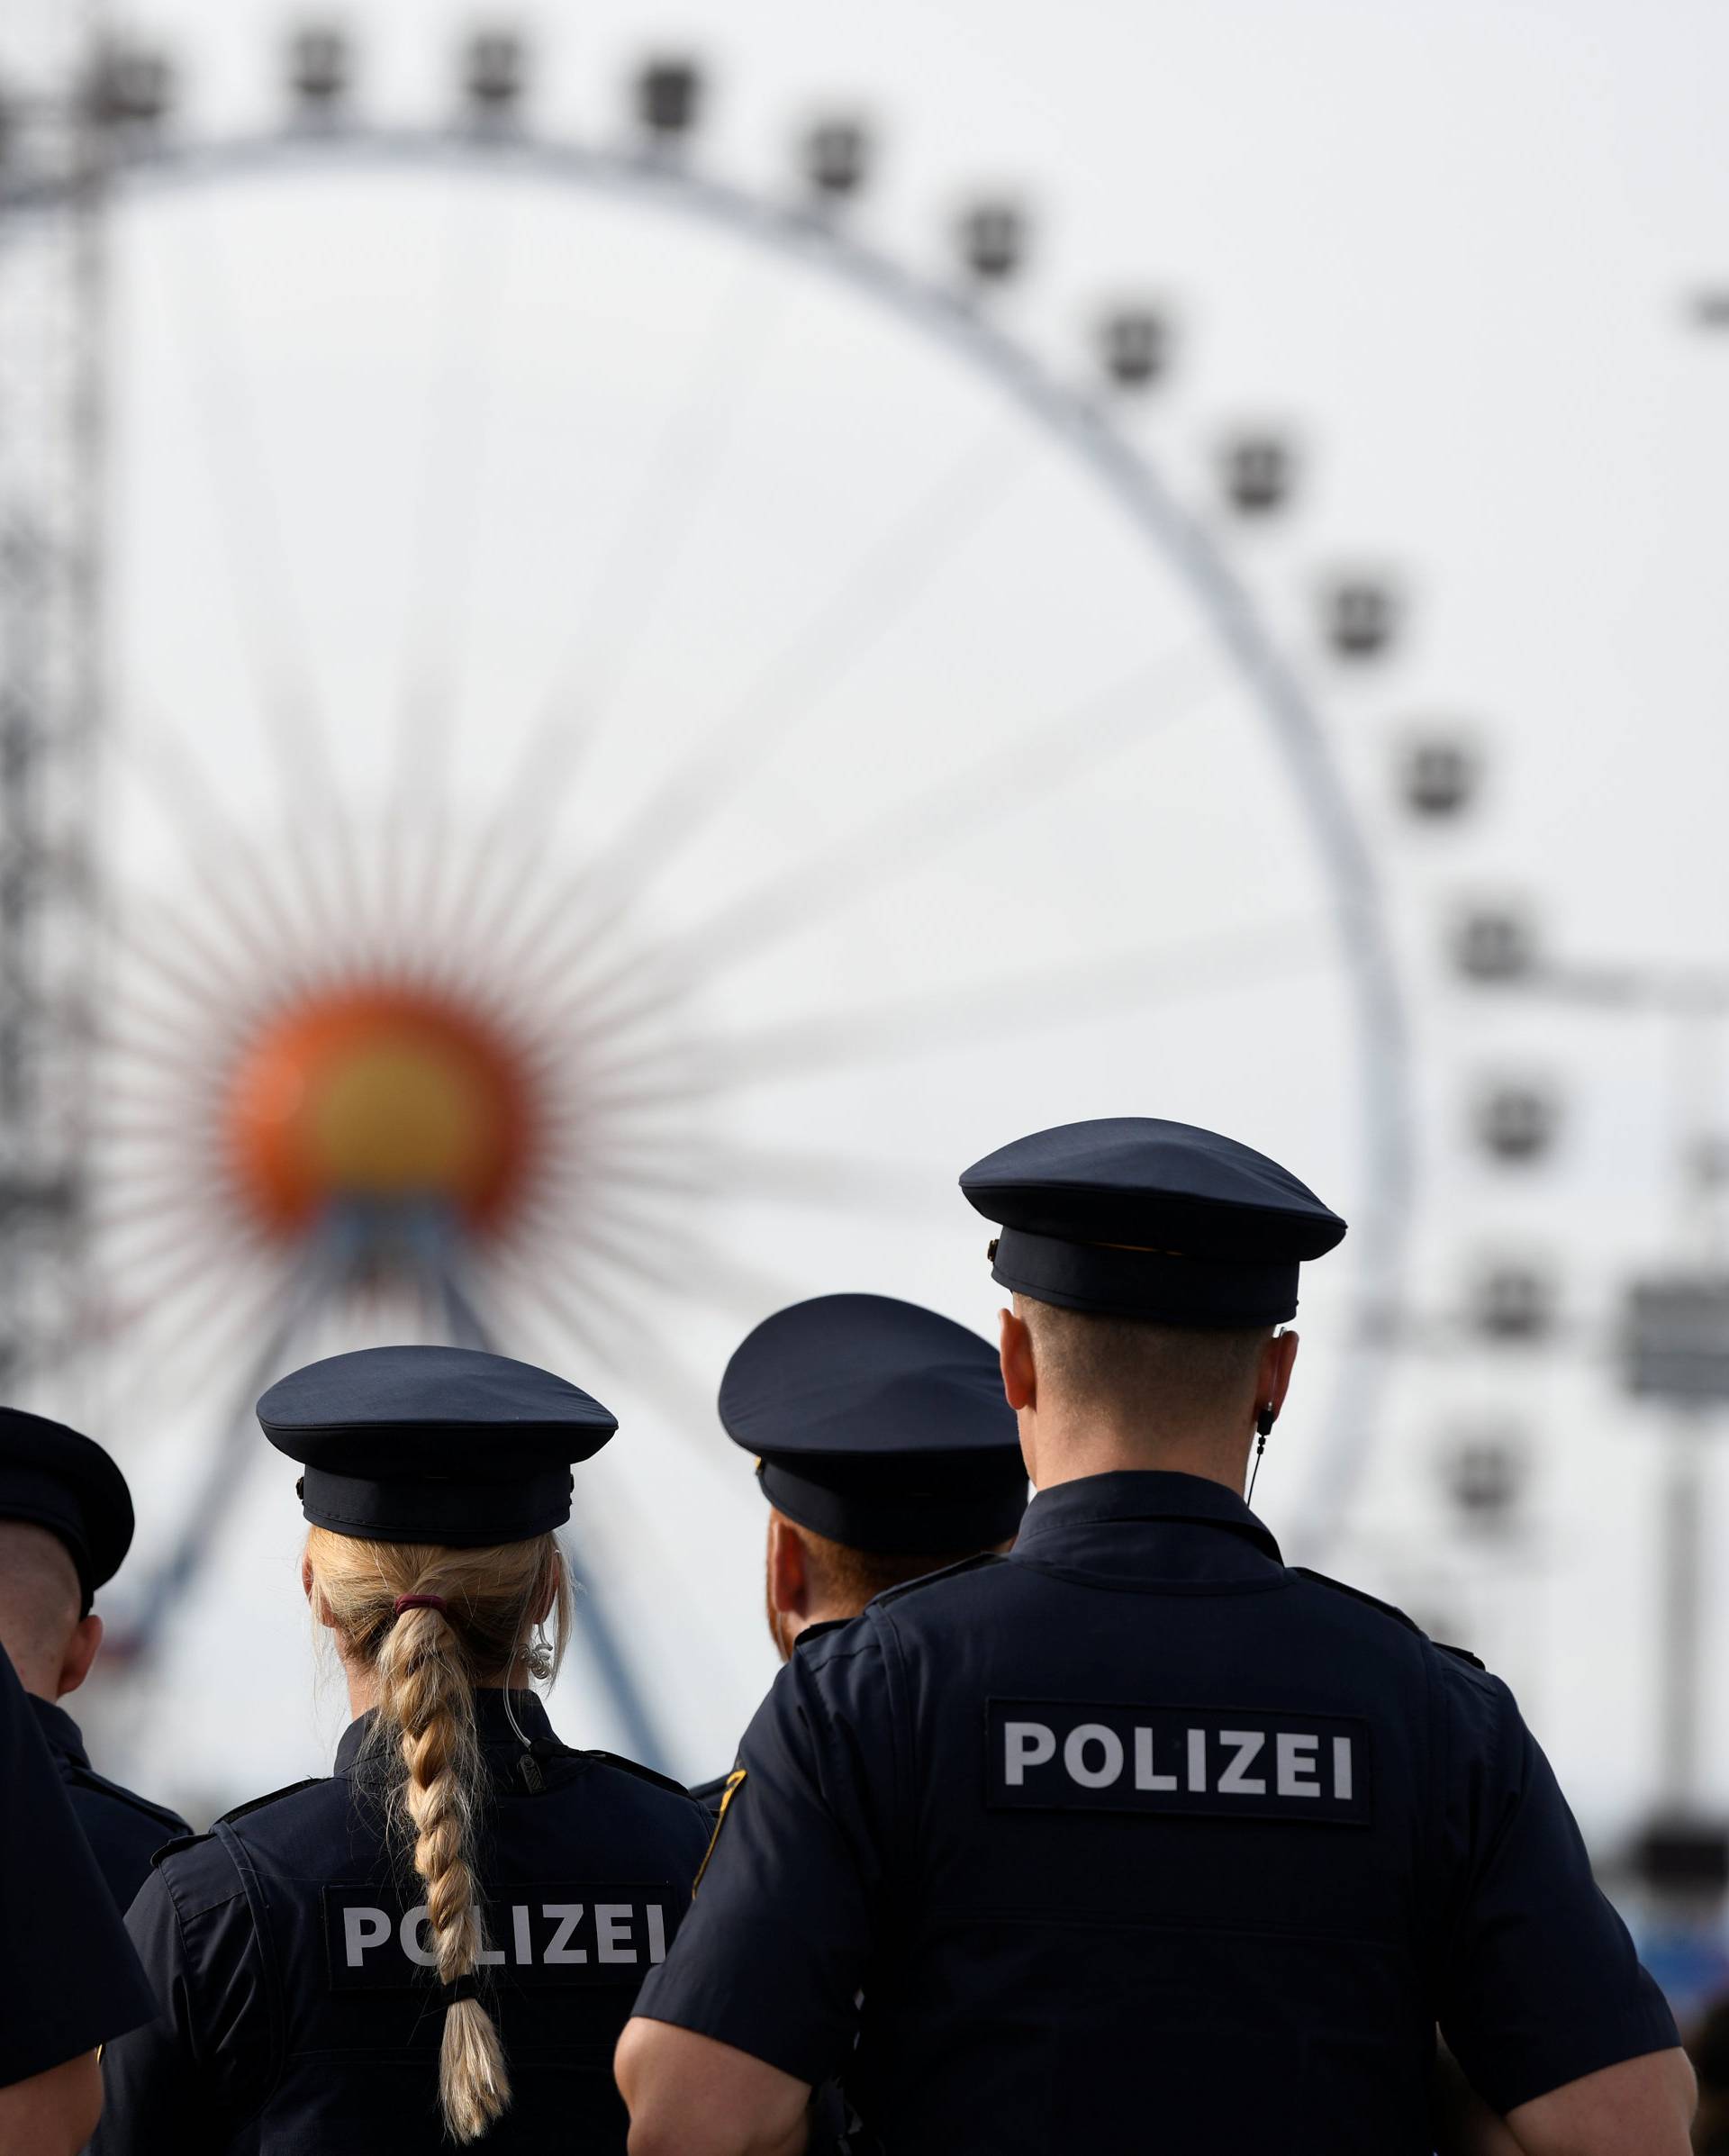 Police officers are seen standing in front of the ferris wheel during the opening day of the 185th Oktoberfest in Munich